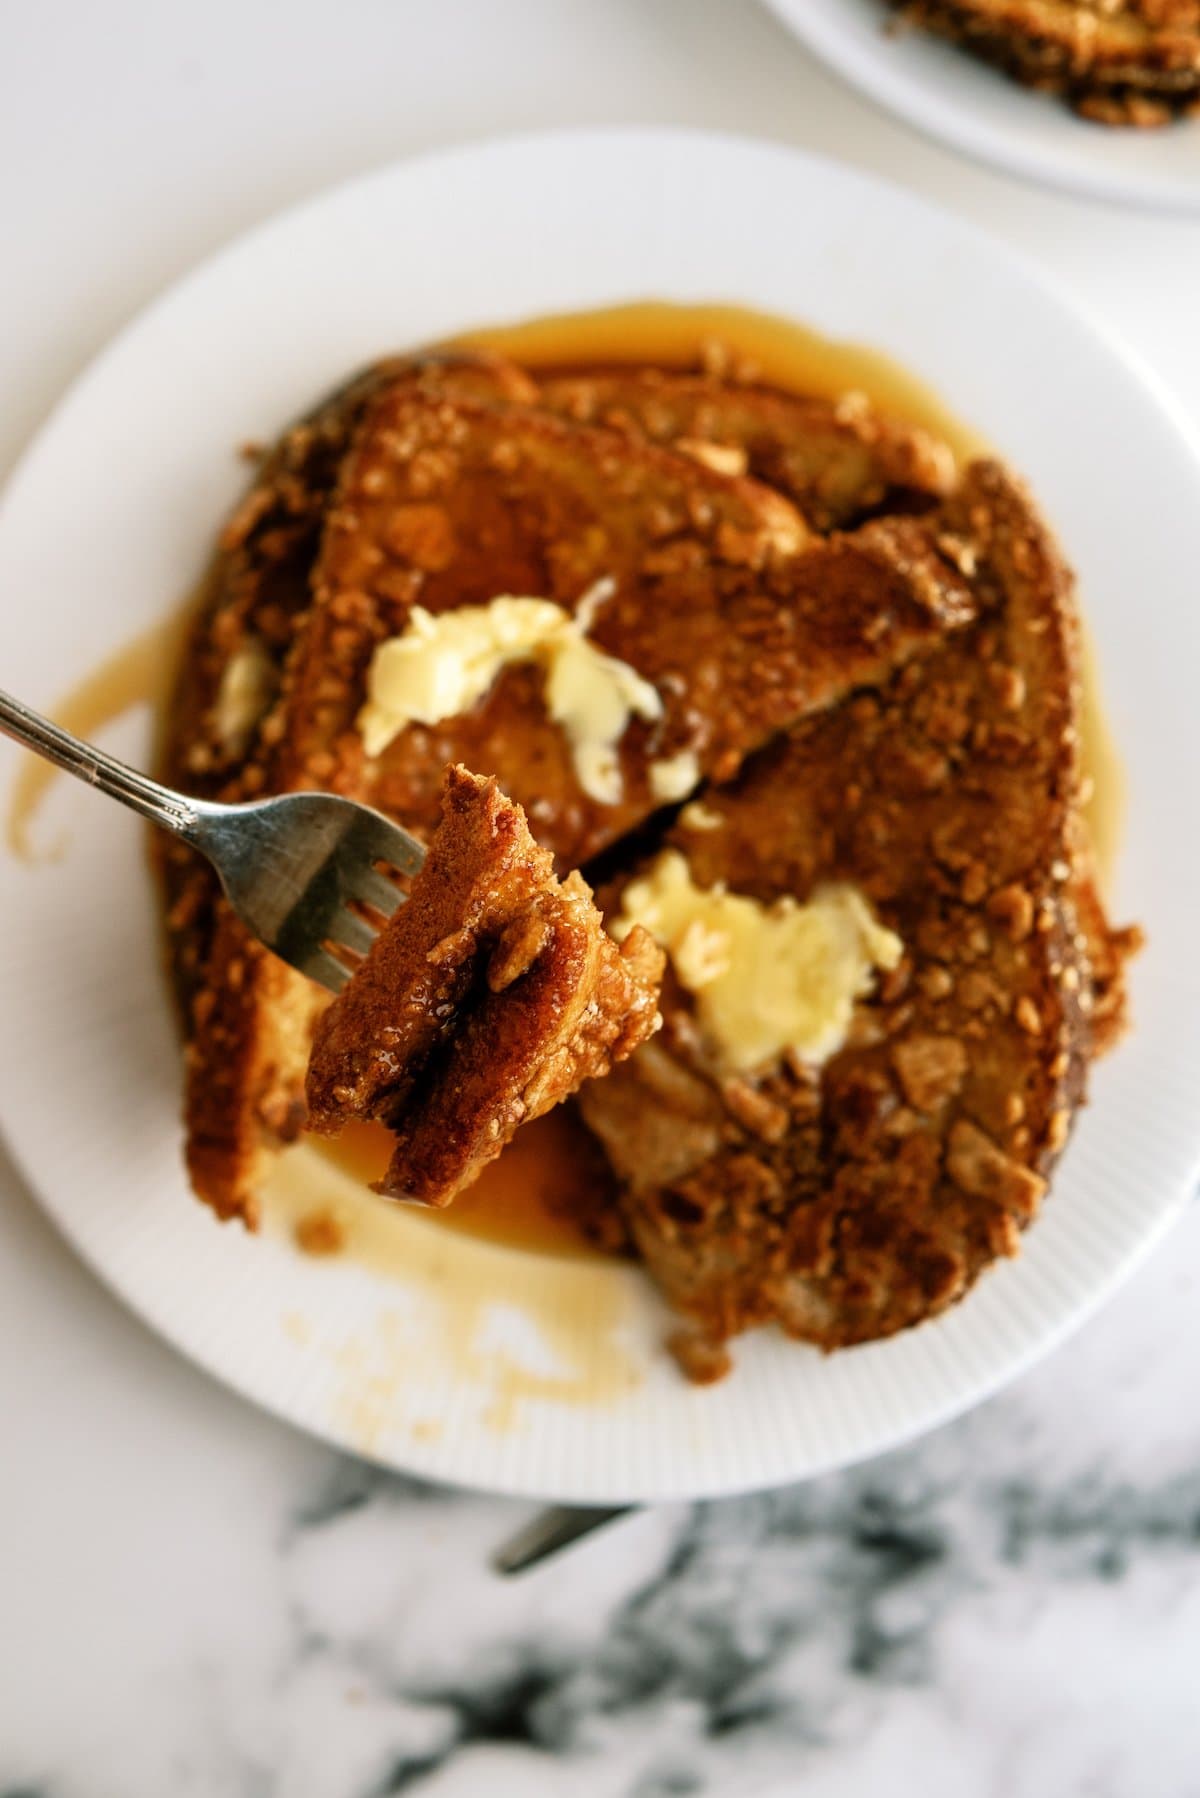 cinnamon encrusted French toast on a plate with a bite on a fork